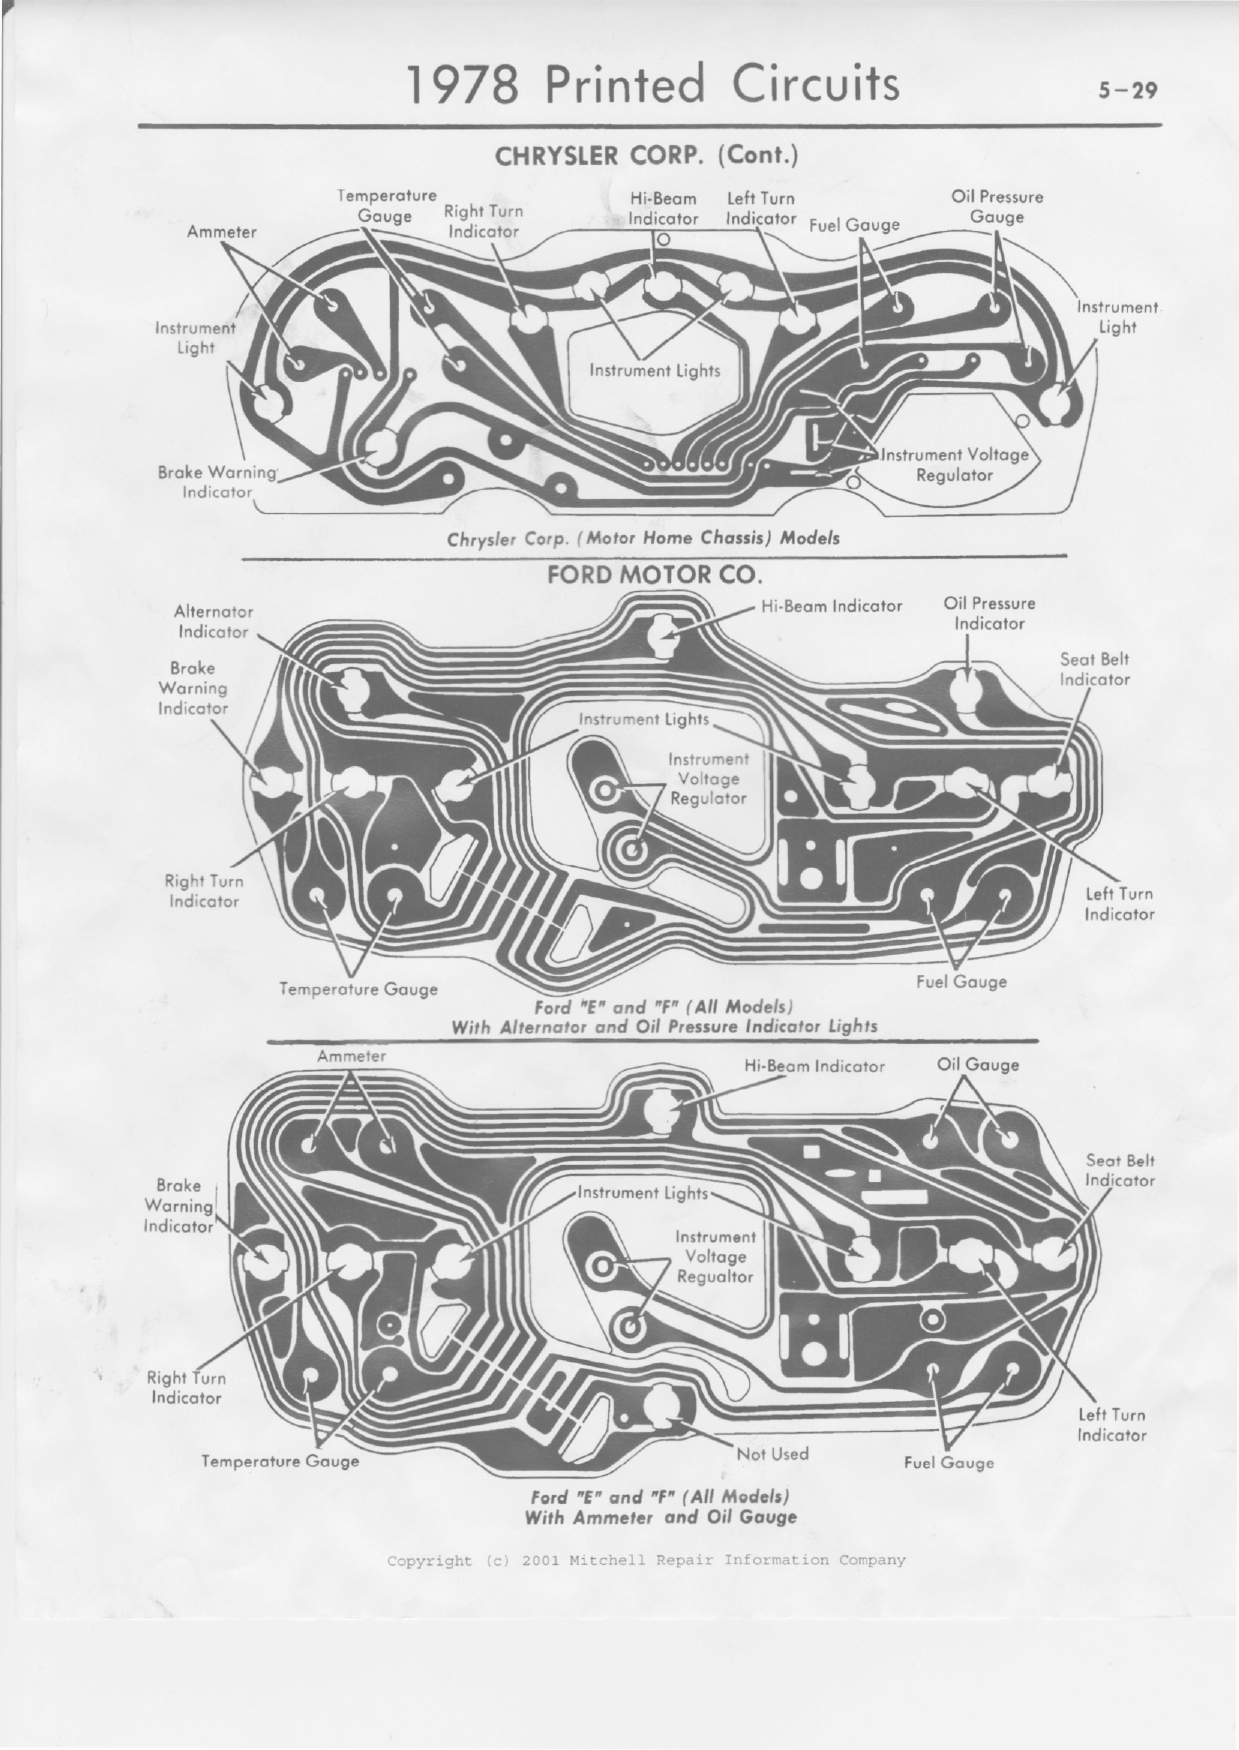 wiring diagram for 75 f250 - Ford Truck Enthusiasts Forums